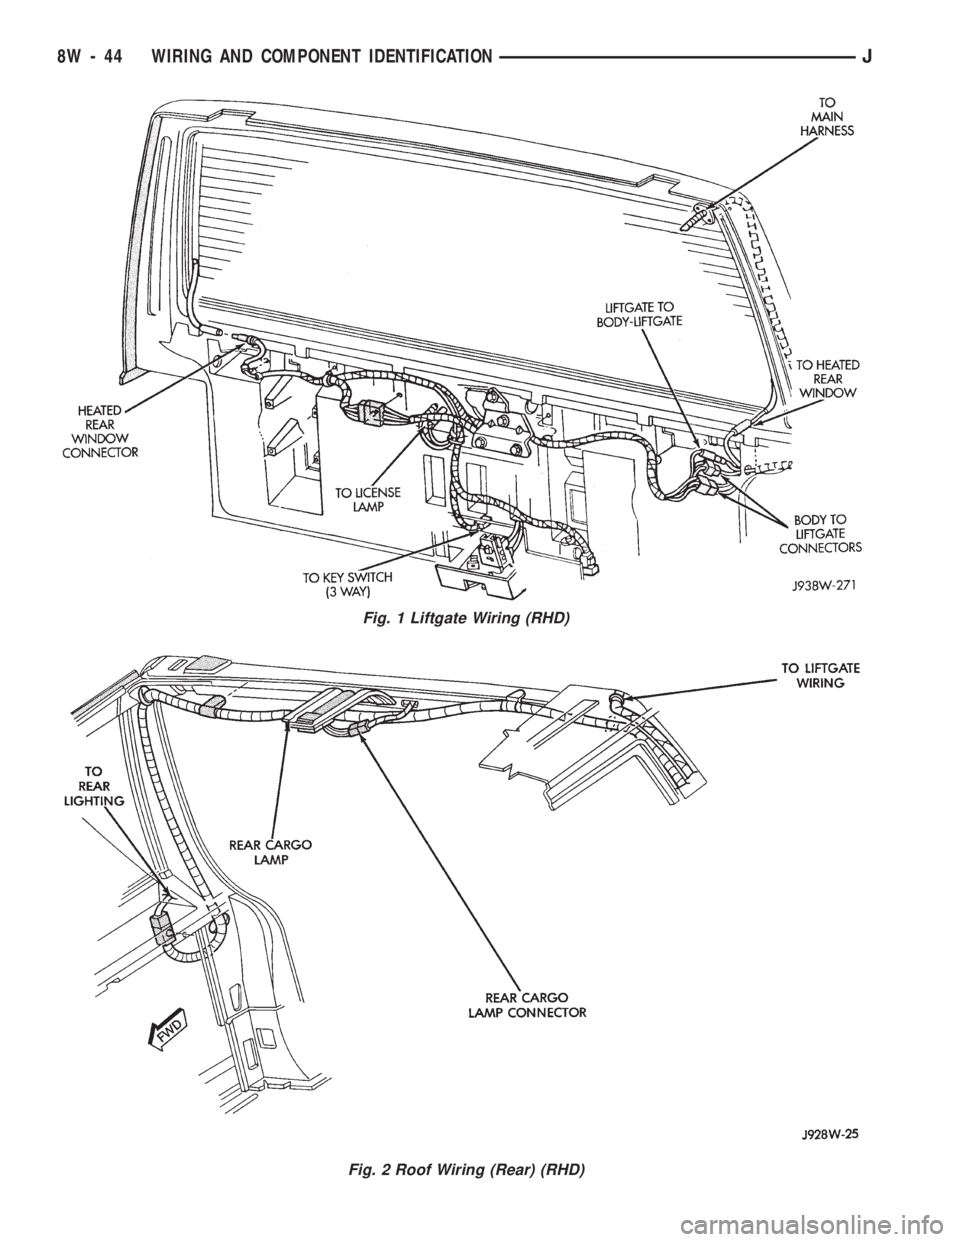 JEEP WRANGLER 1994  Owners Manual Fig. 2 Roof Wiring (Rear) (RHD)
8W - 44 WIRING AND COMPONENT IDENTIFICATIONJ 